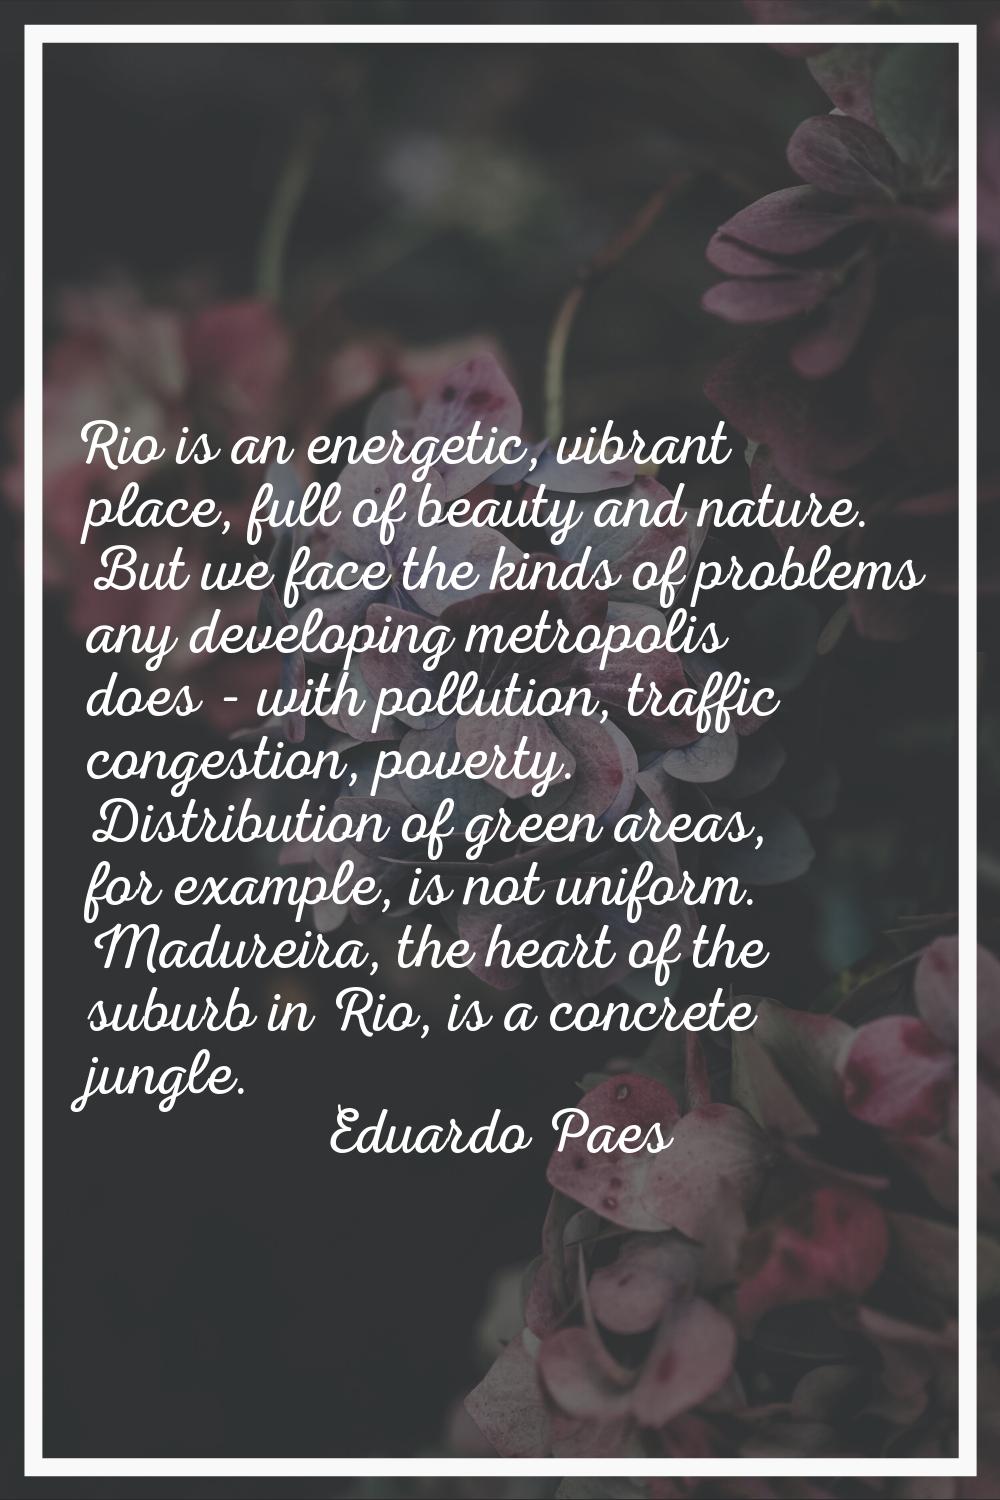 Rio is an energetic, vibrant place, full of beauty and nature. But we face the kinds of problems an